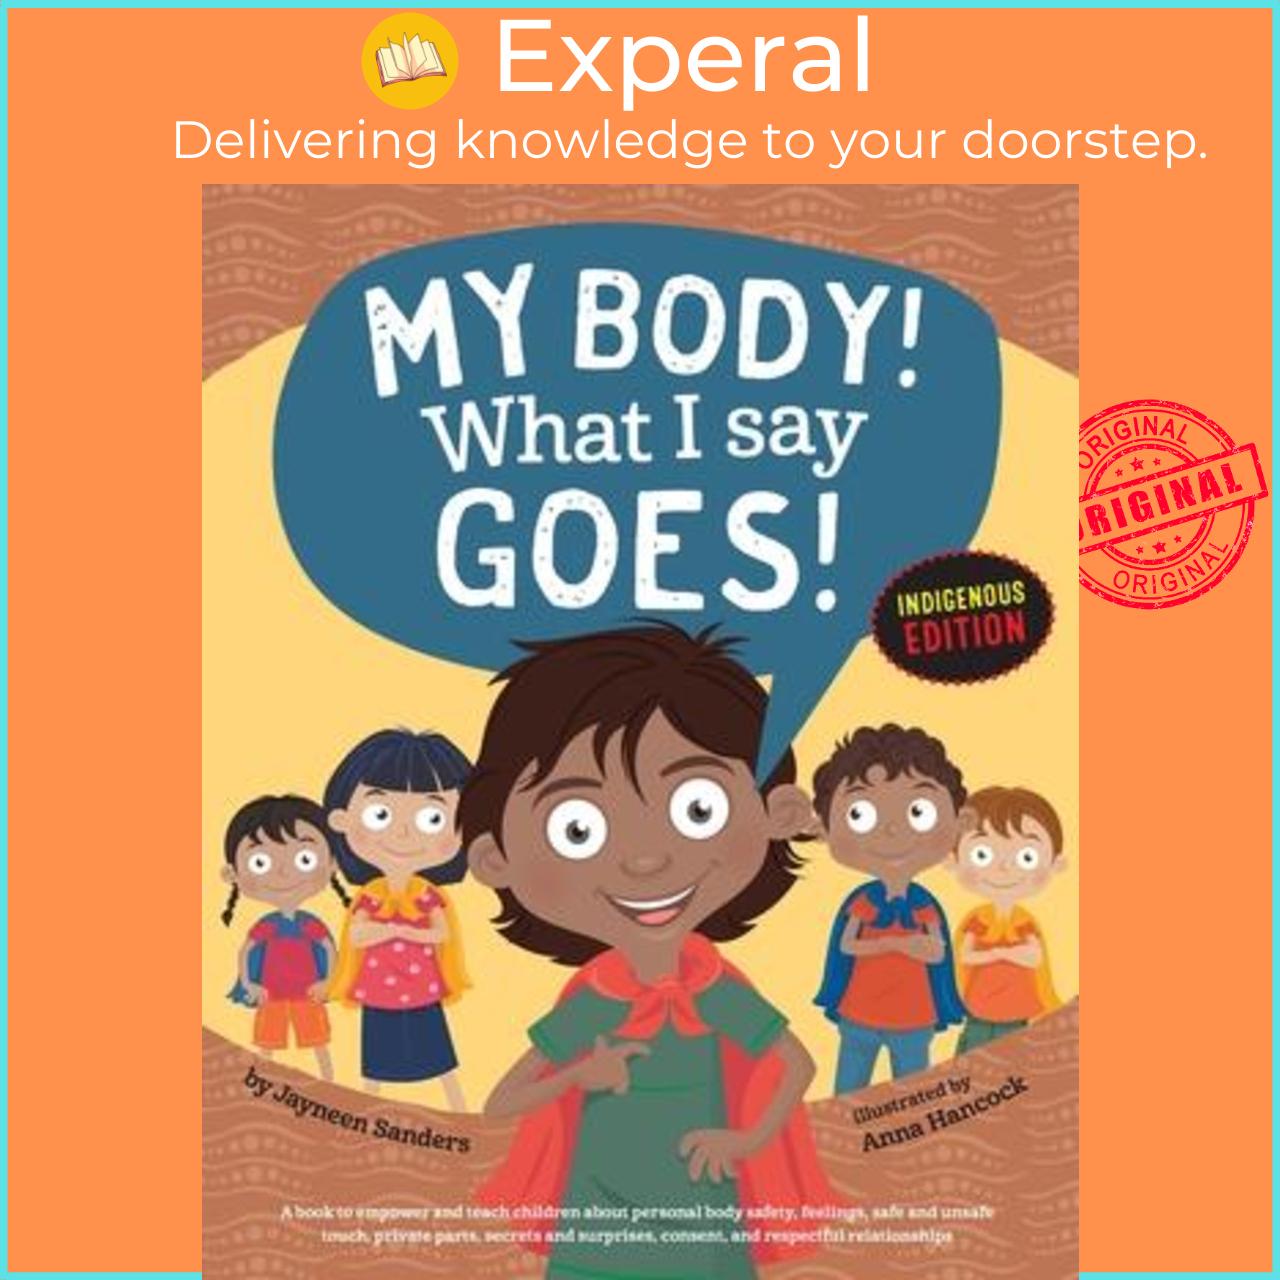 Sách - My Body! What I Say Goes! Indigenous Edition : Teach Children Body Safety, Safe/Un by Jayneen Sanders (paperback)